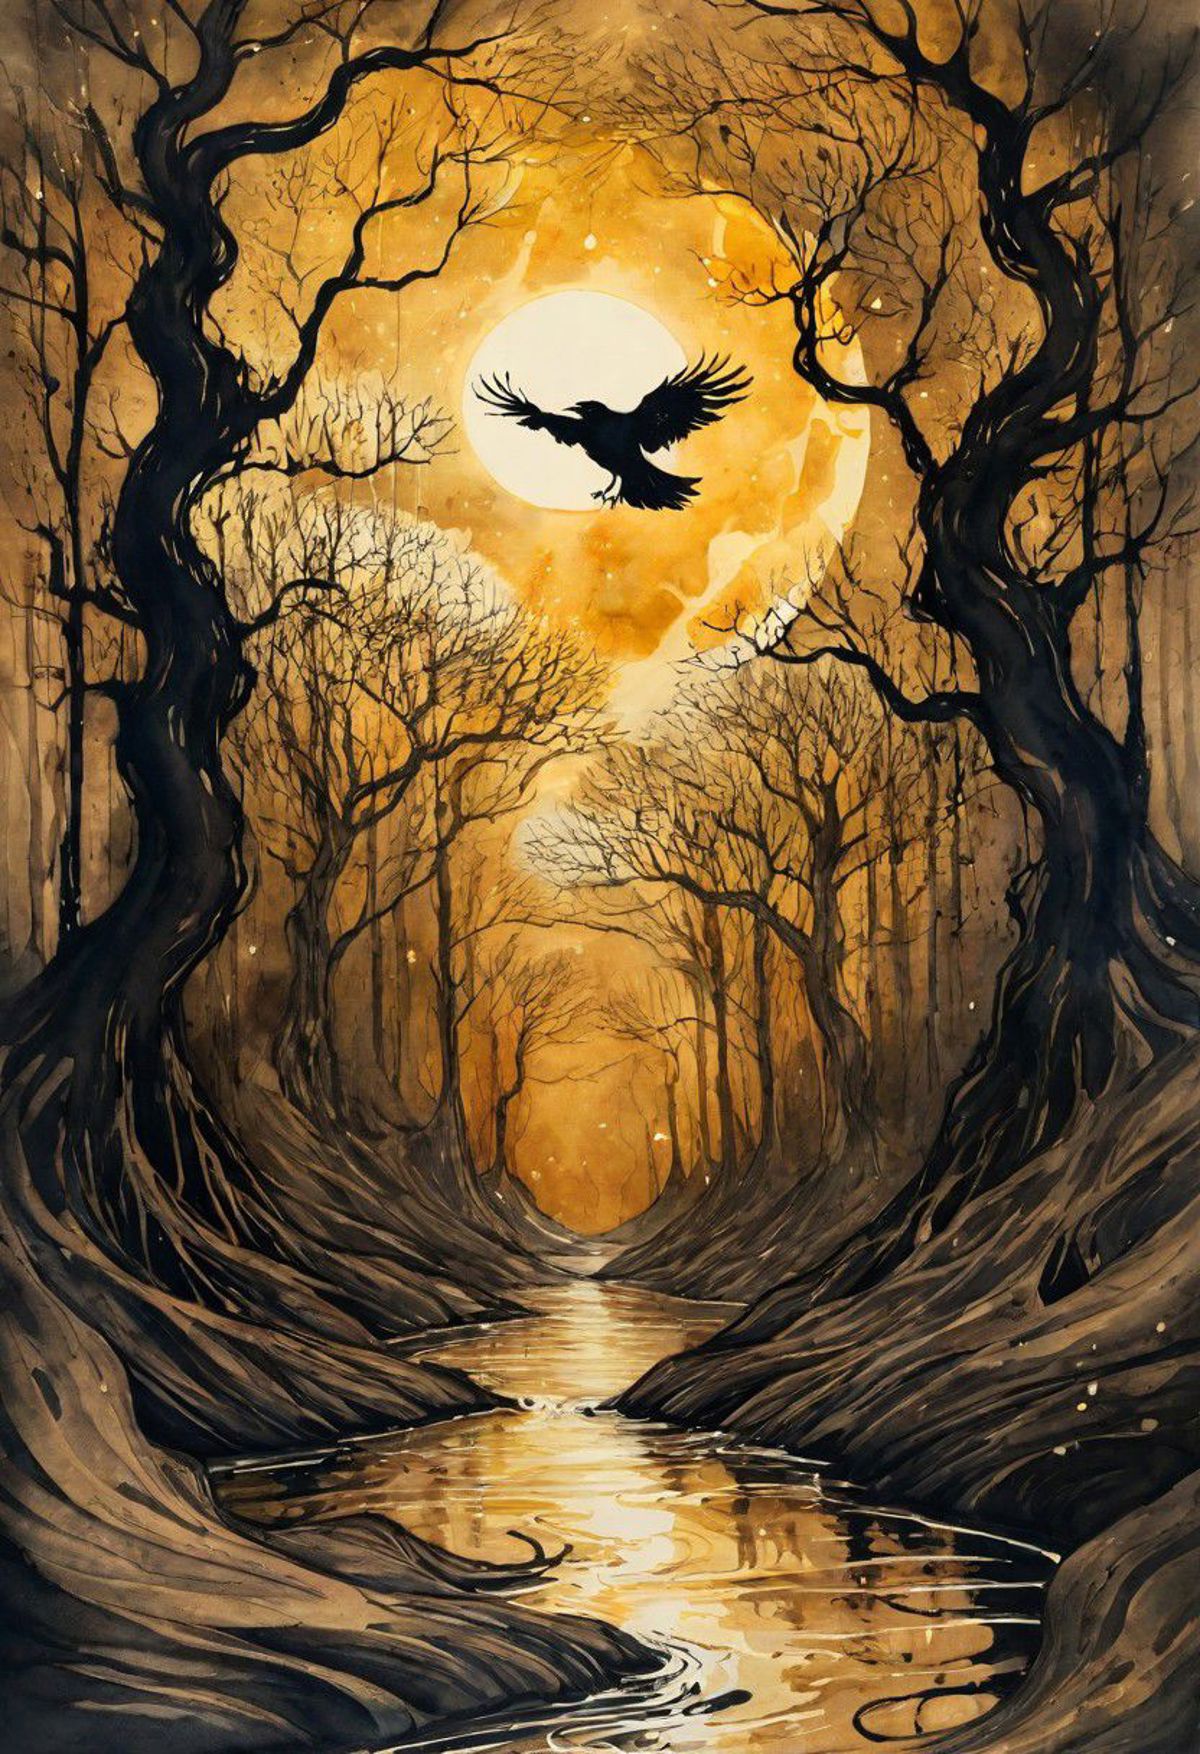 A painting of a forest with a moonlit night, a bird flying in front, and a river in the middle.